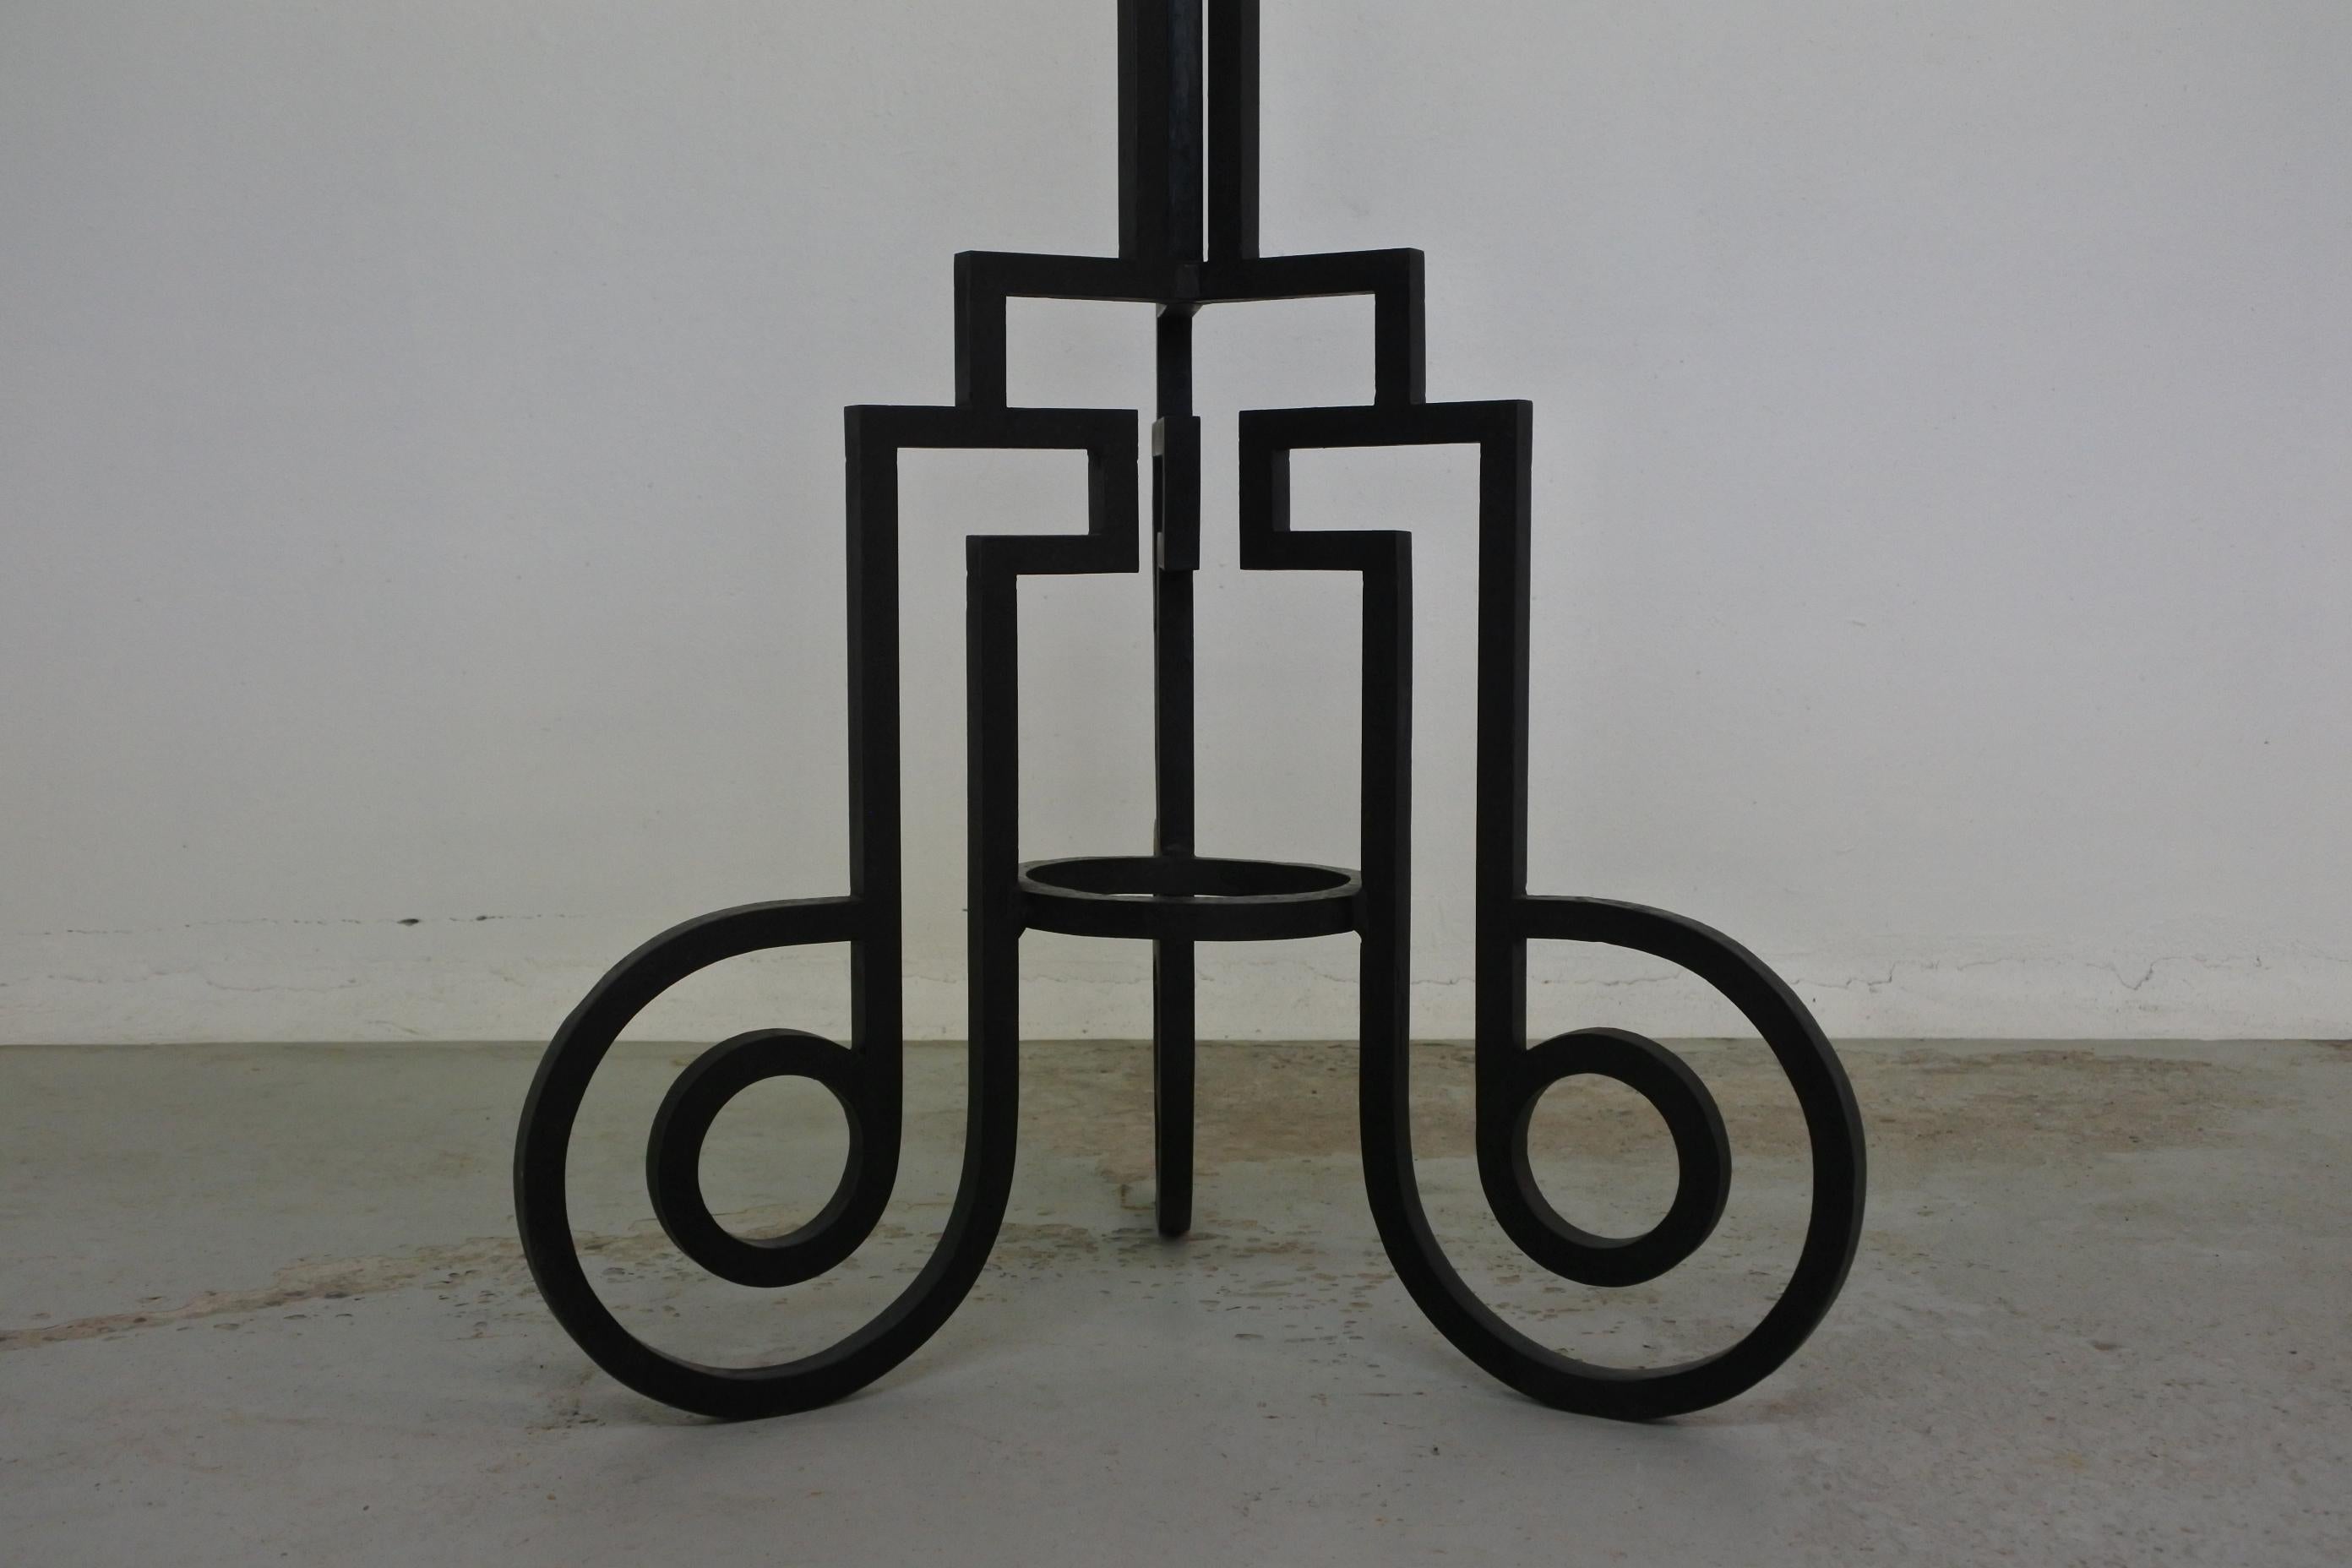 Art Deco tripod floor lamp.
Wrought iron.
Geometric base.

Made in France in the 1930s.

Original electrical system. To be safe, the lamp should be checked locally by a specialist to fully comply with local requirements and regulations.